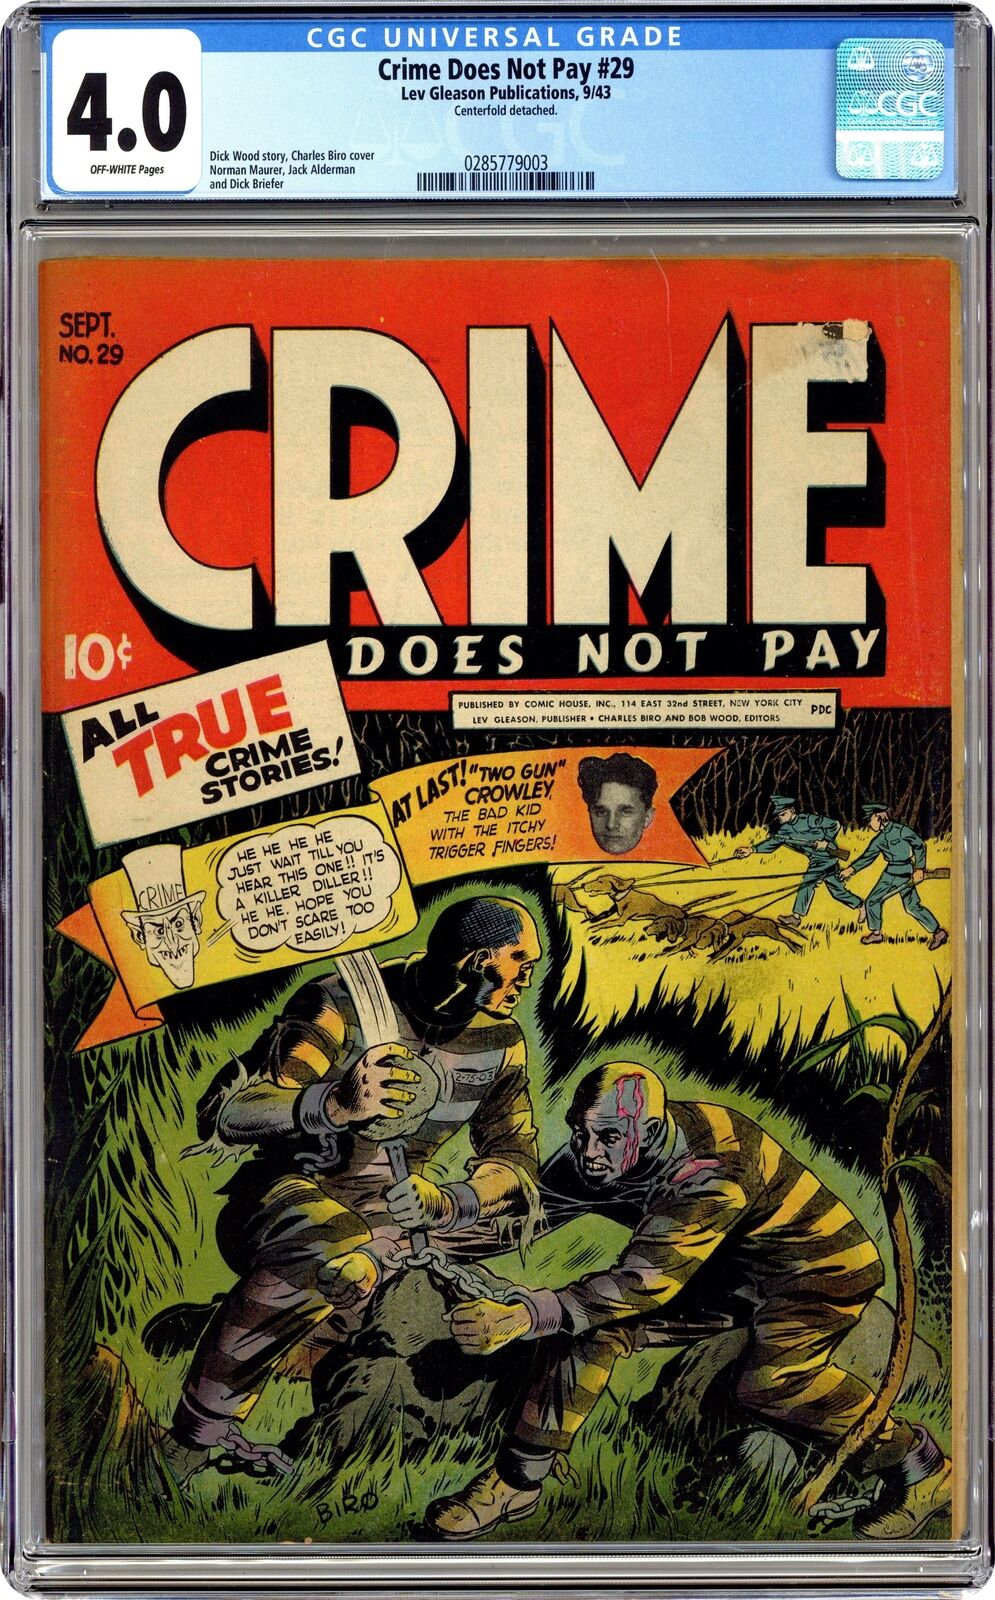 Crime Does Not Pay #29 CGC 4.0 1943 0285779003